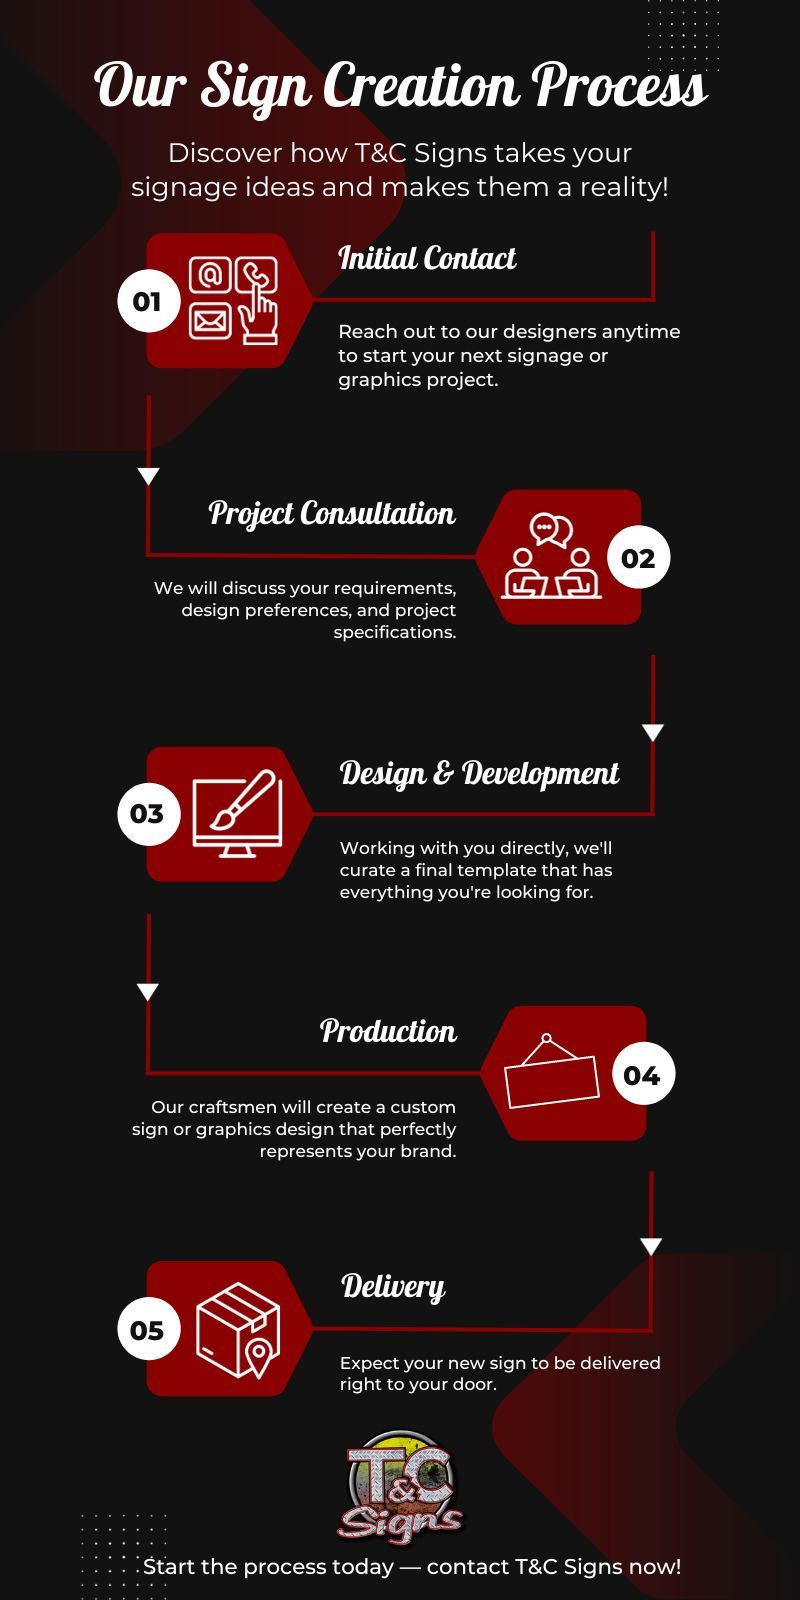 Our Sign Creation Process Infographic